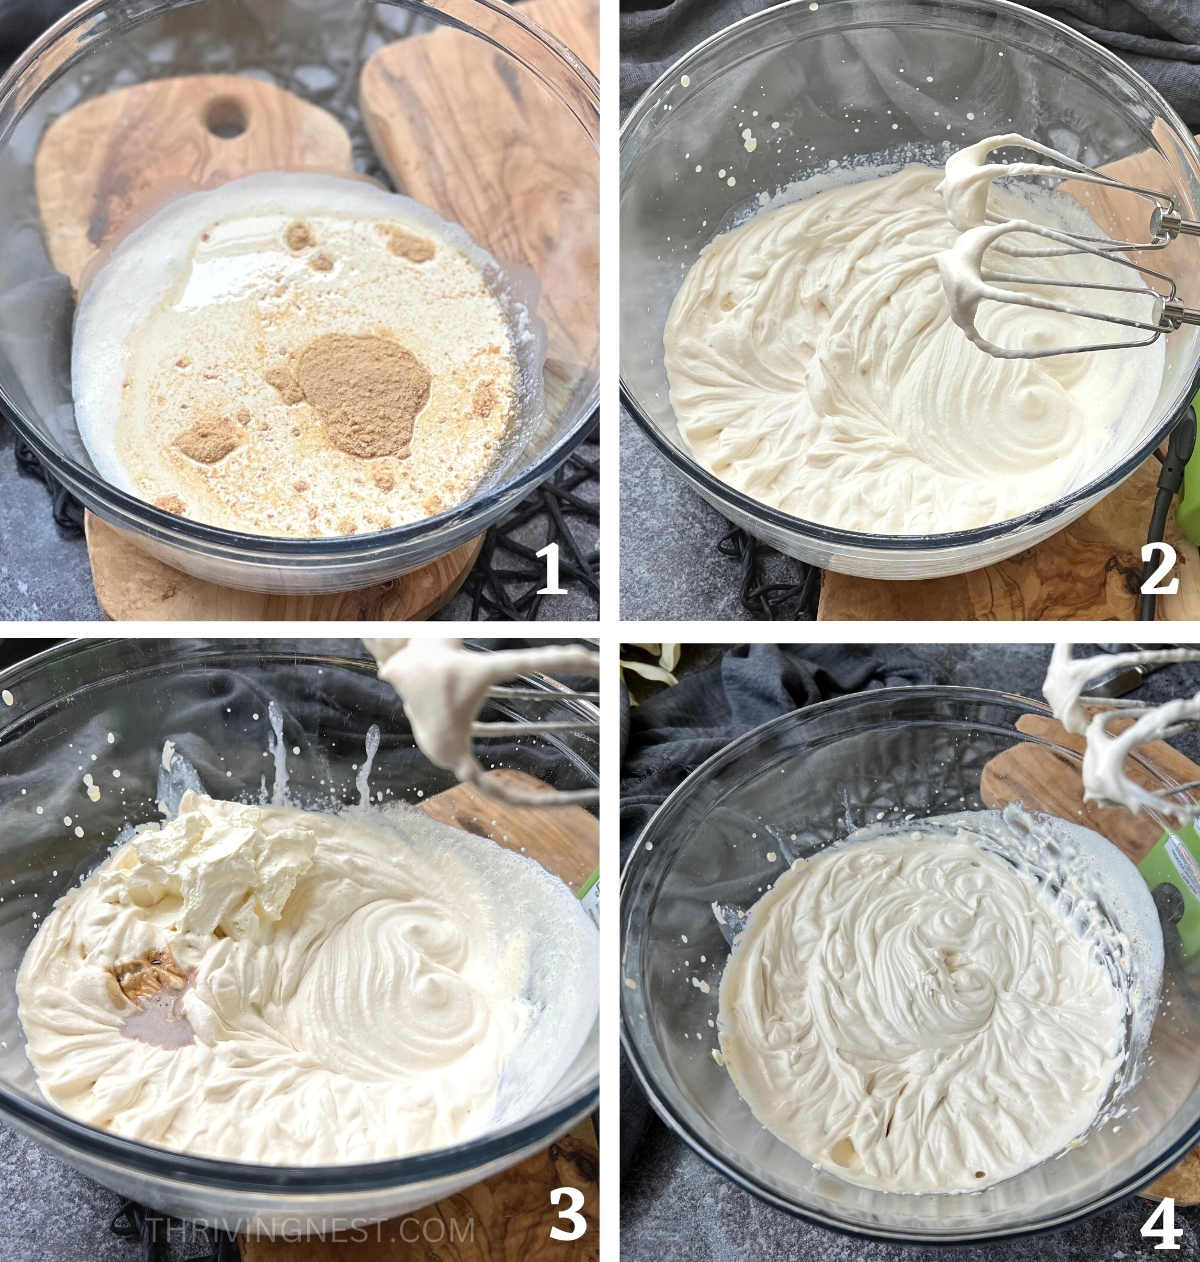 Process shots showing how to make the frosting for the first smash cake for baby by mixing heavy cream and sour cream with a hand mixer in a large bowl.